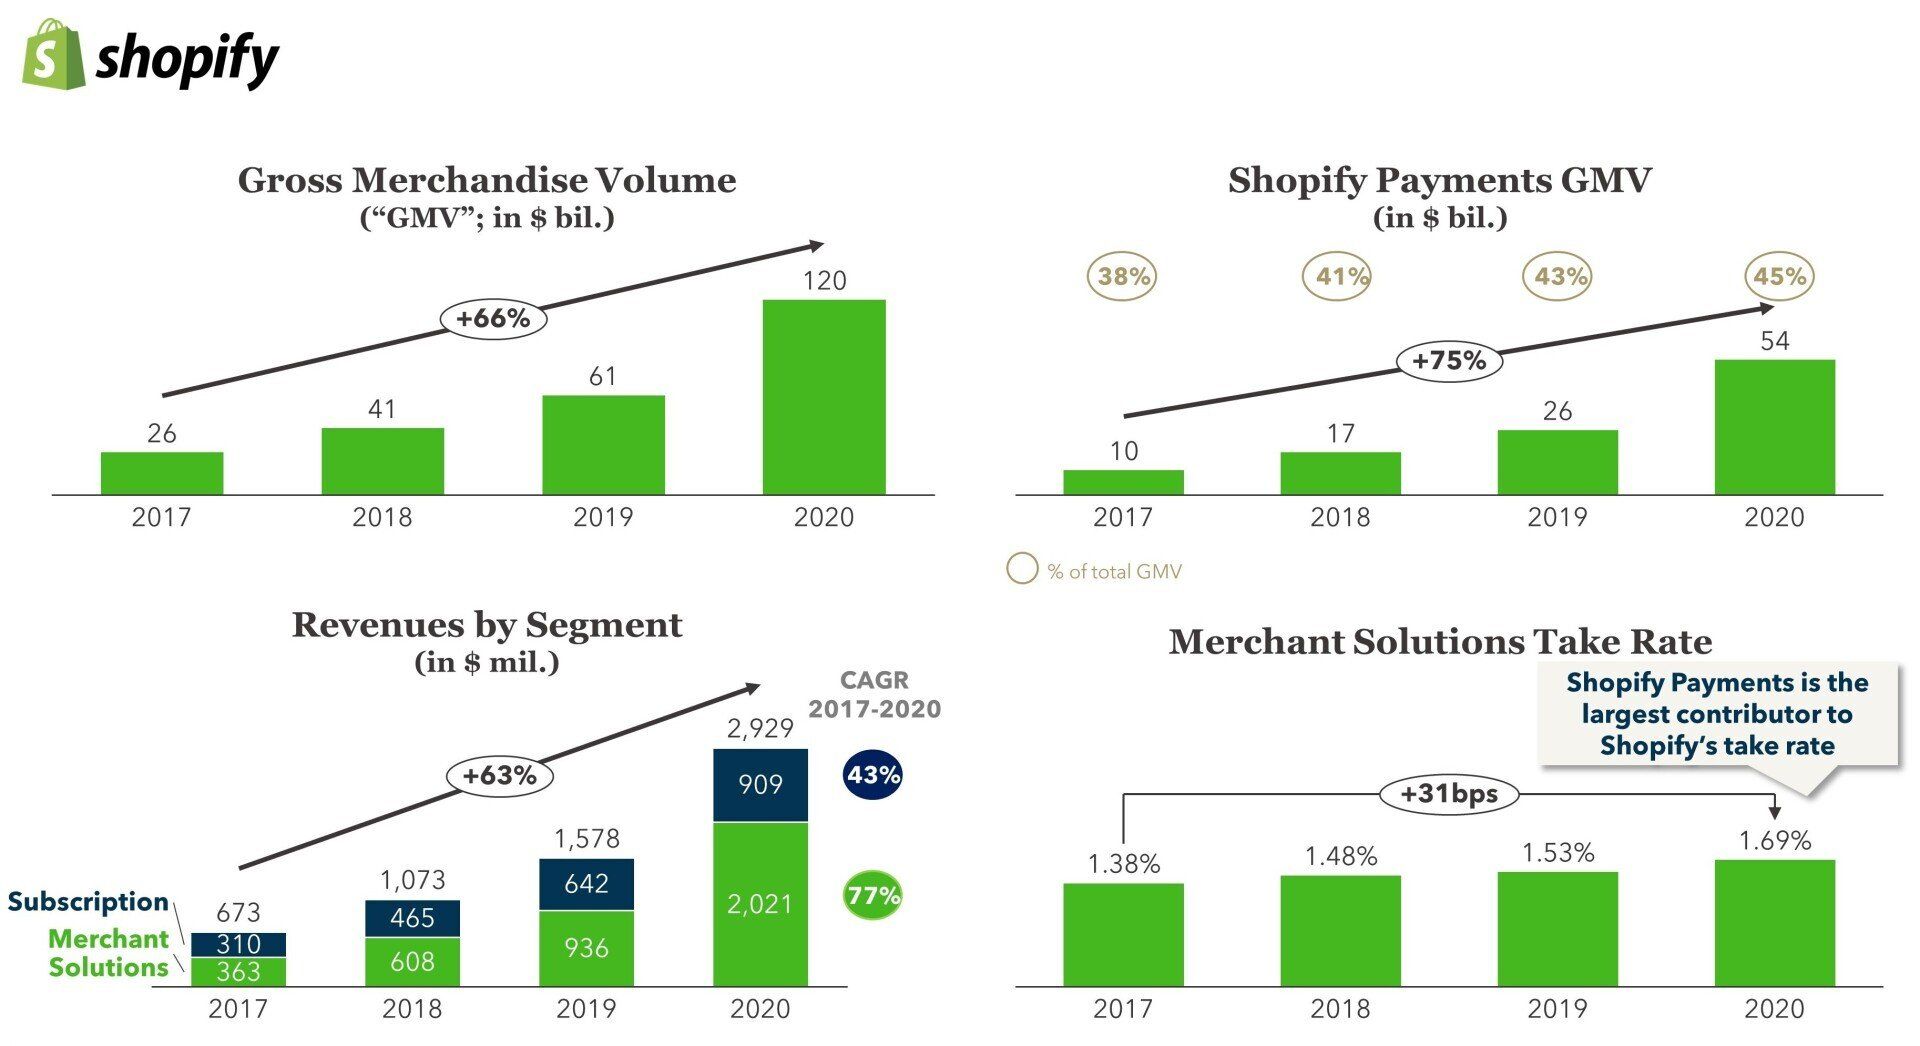  FIGURE 1: Massive Potential – The Scaling of Shopify Payments